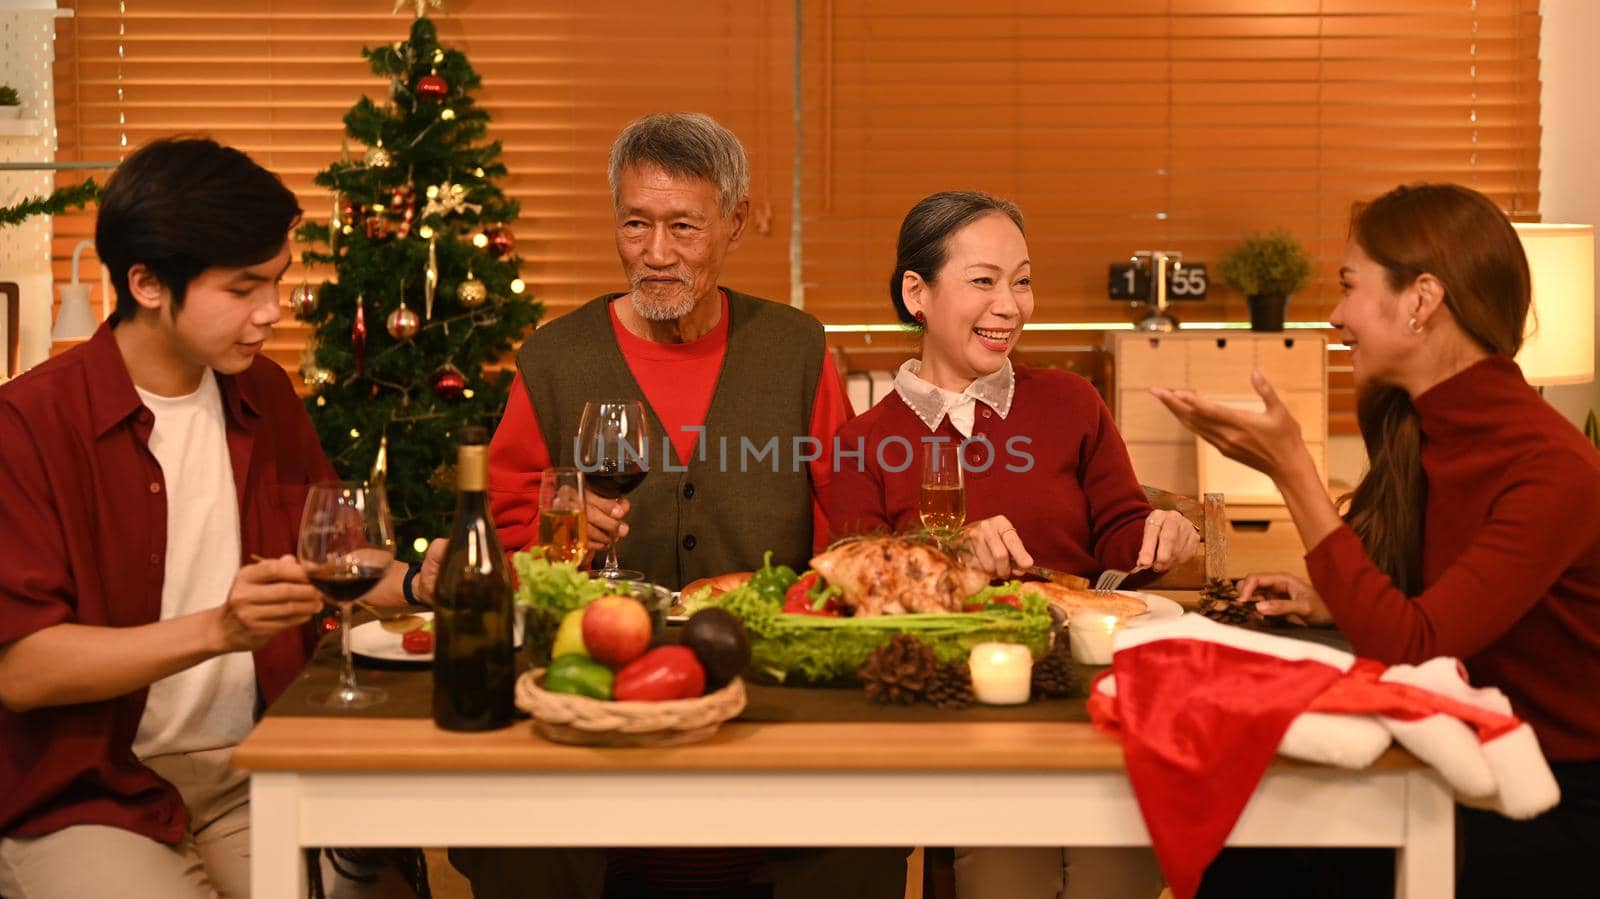 Group of people enjoying Thanksgiving meal in comfortable home. Celebration, holidays and Christmas concept by prathanchorruangsak